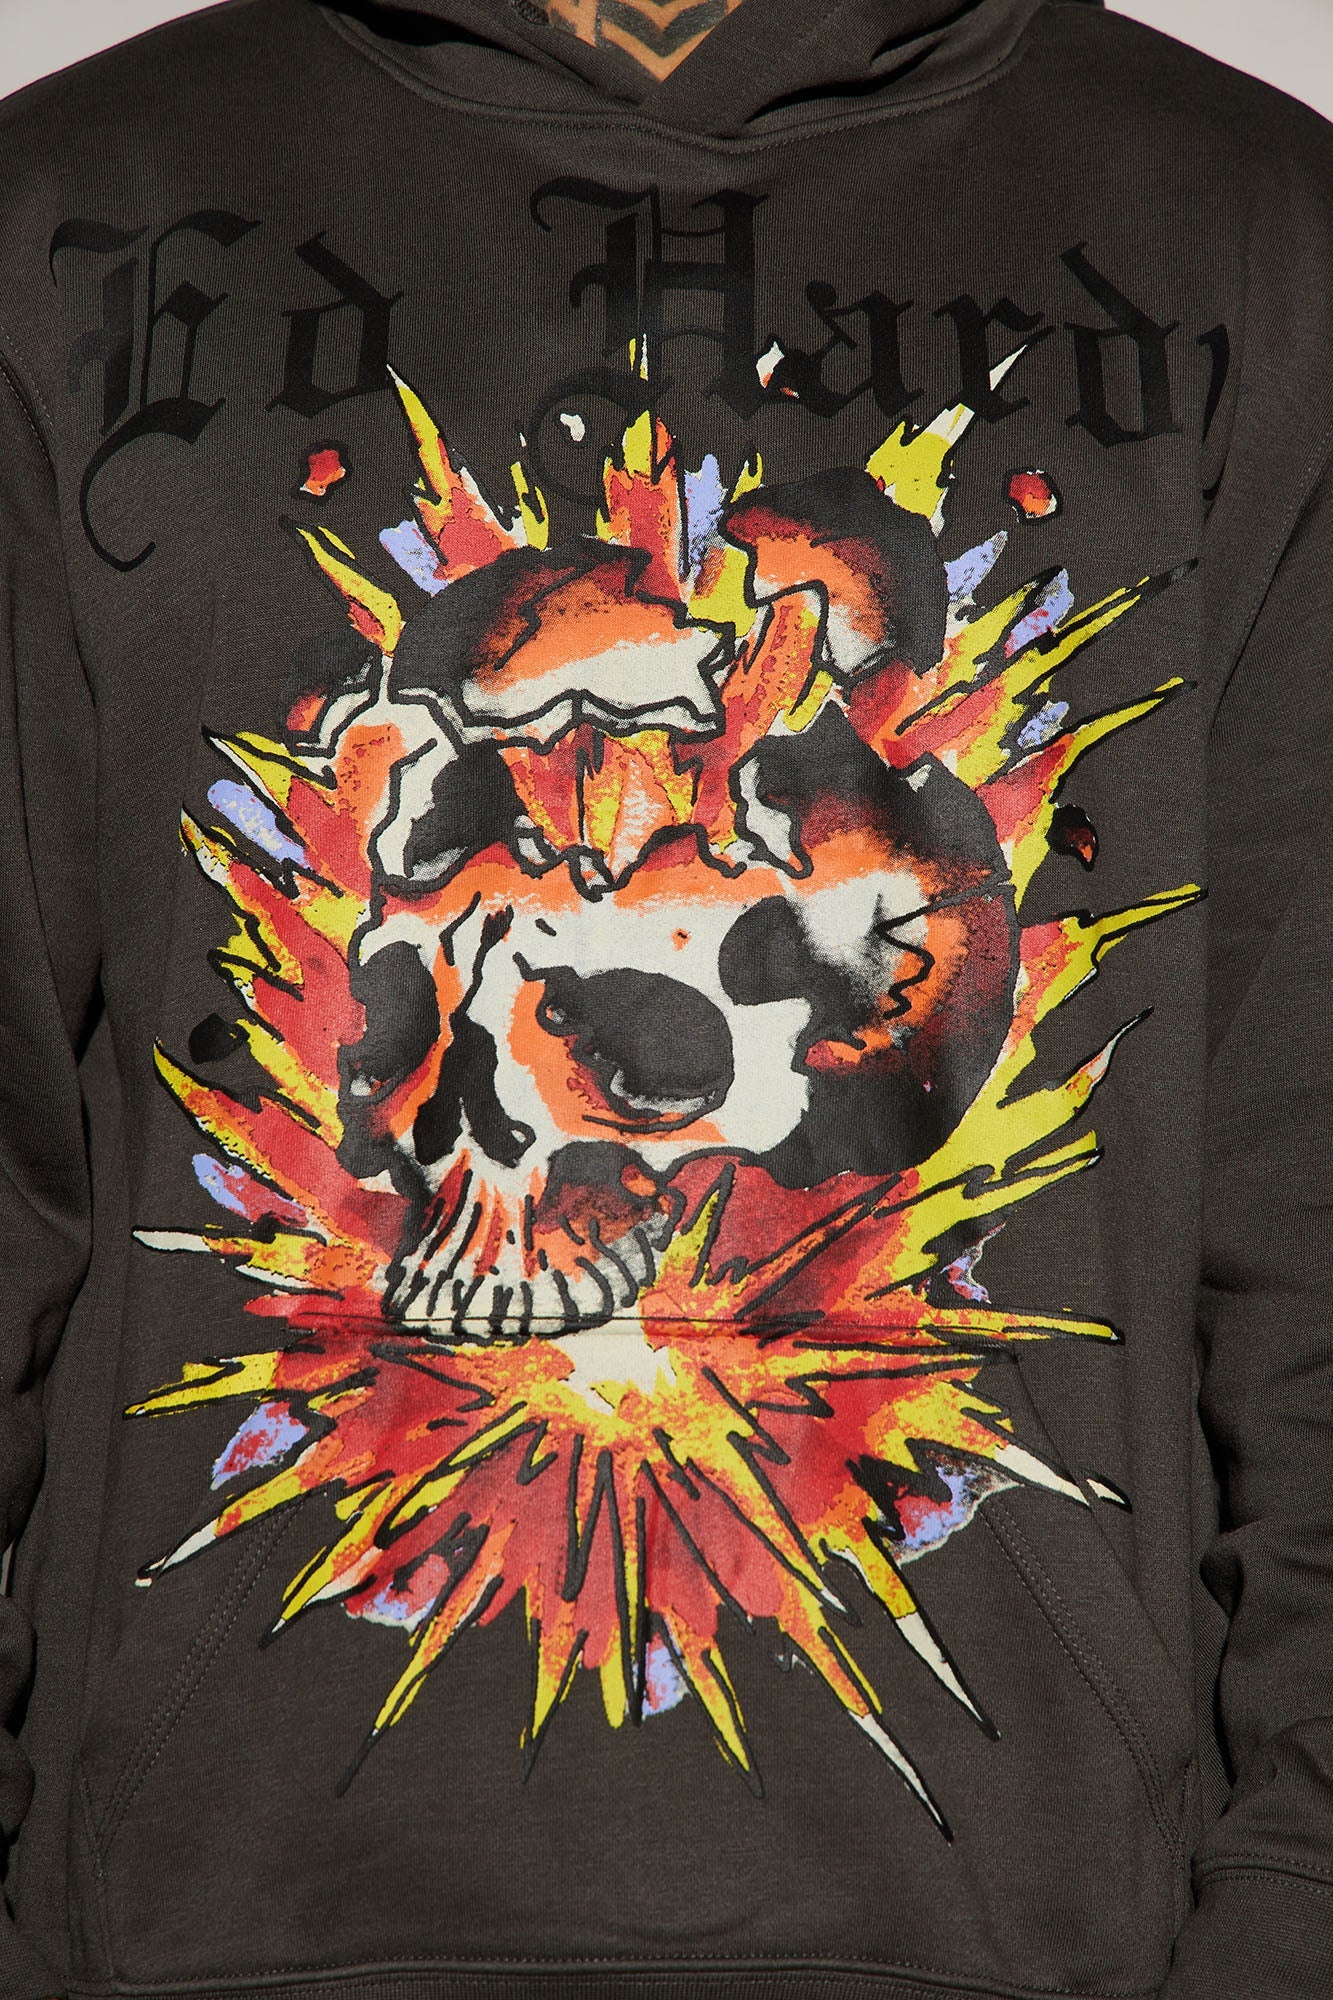 Ed Hardy Exploding Skull Hoodie in Charcoal – Rocker Chic Style